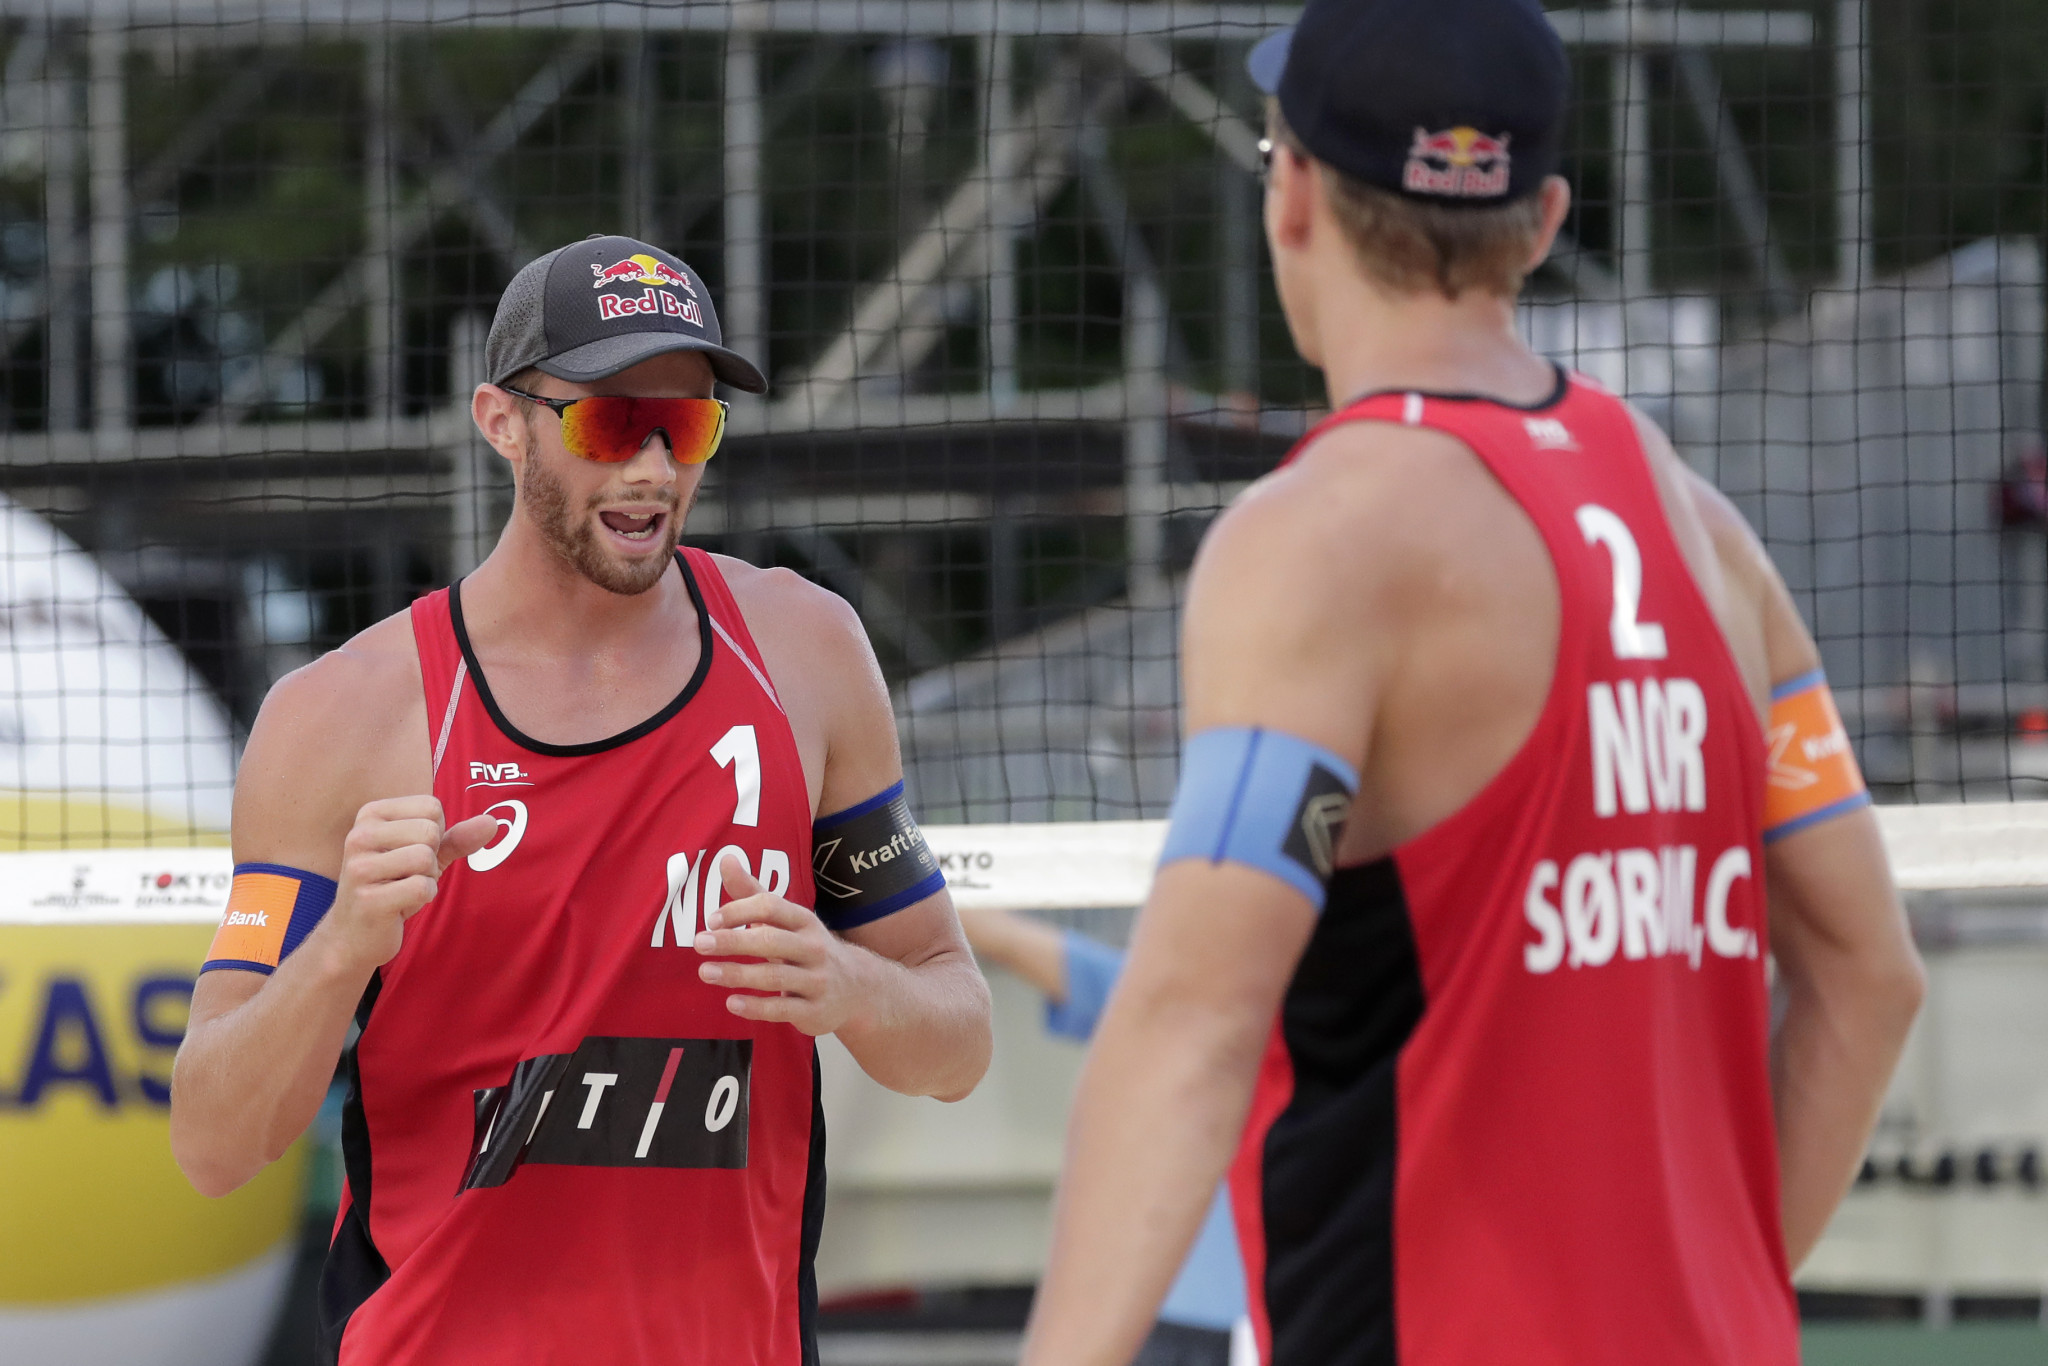 Mol and Sørum reach last four in bid for European Beach Volleyball Championships hat-trick